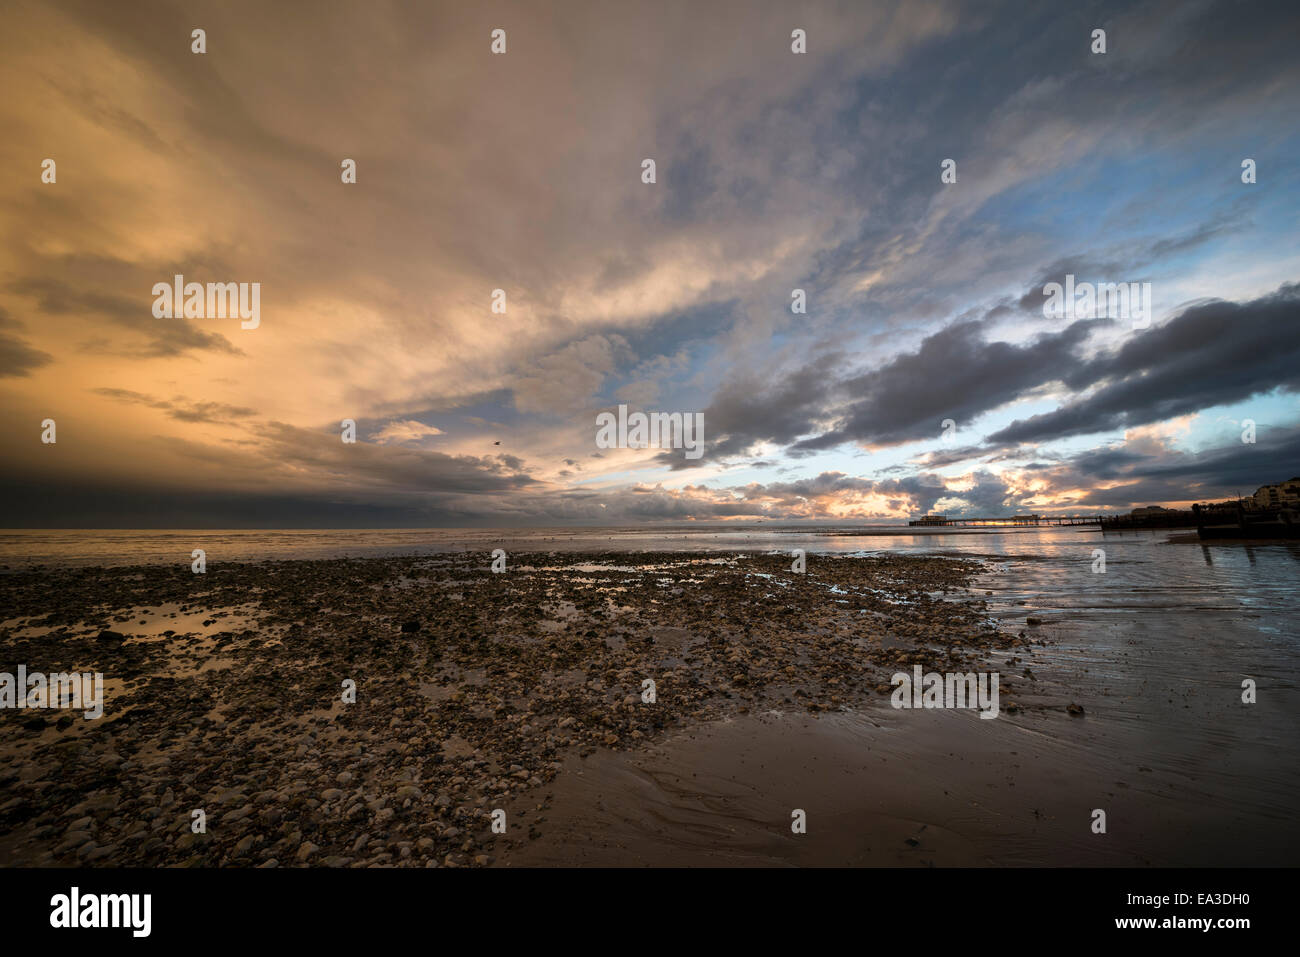 Awesome nuvole sopra Worthing Beach, West Sussex, Regno Unito Foto Stock